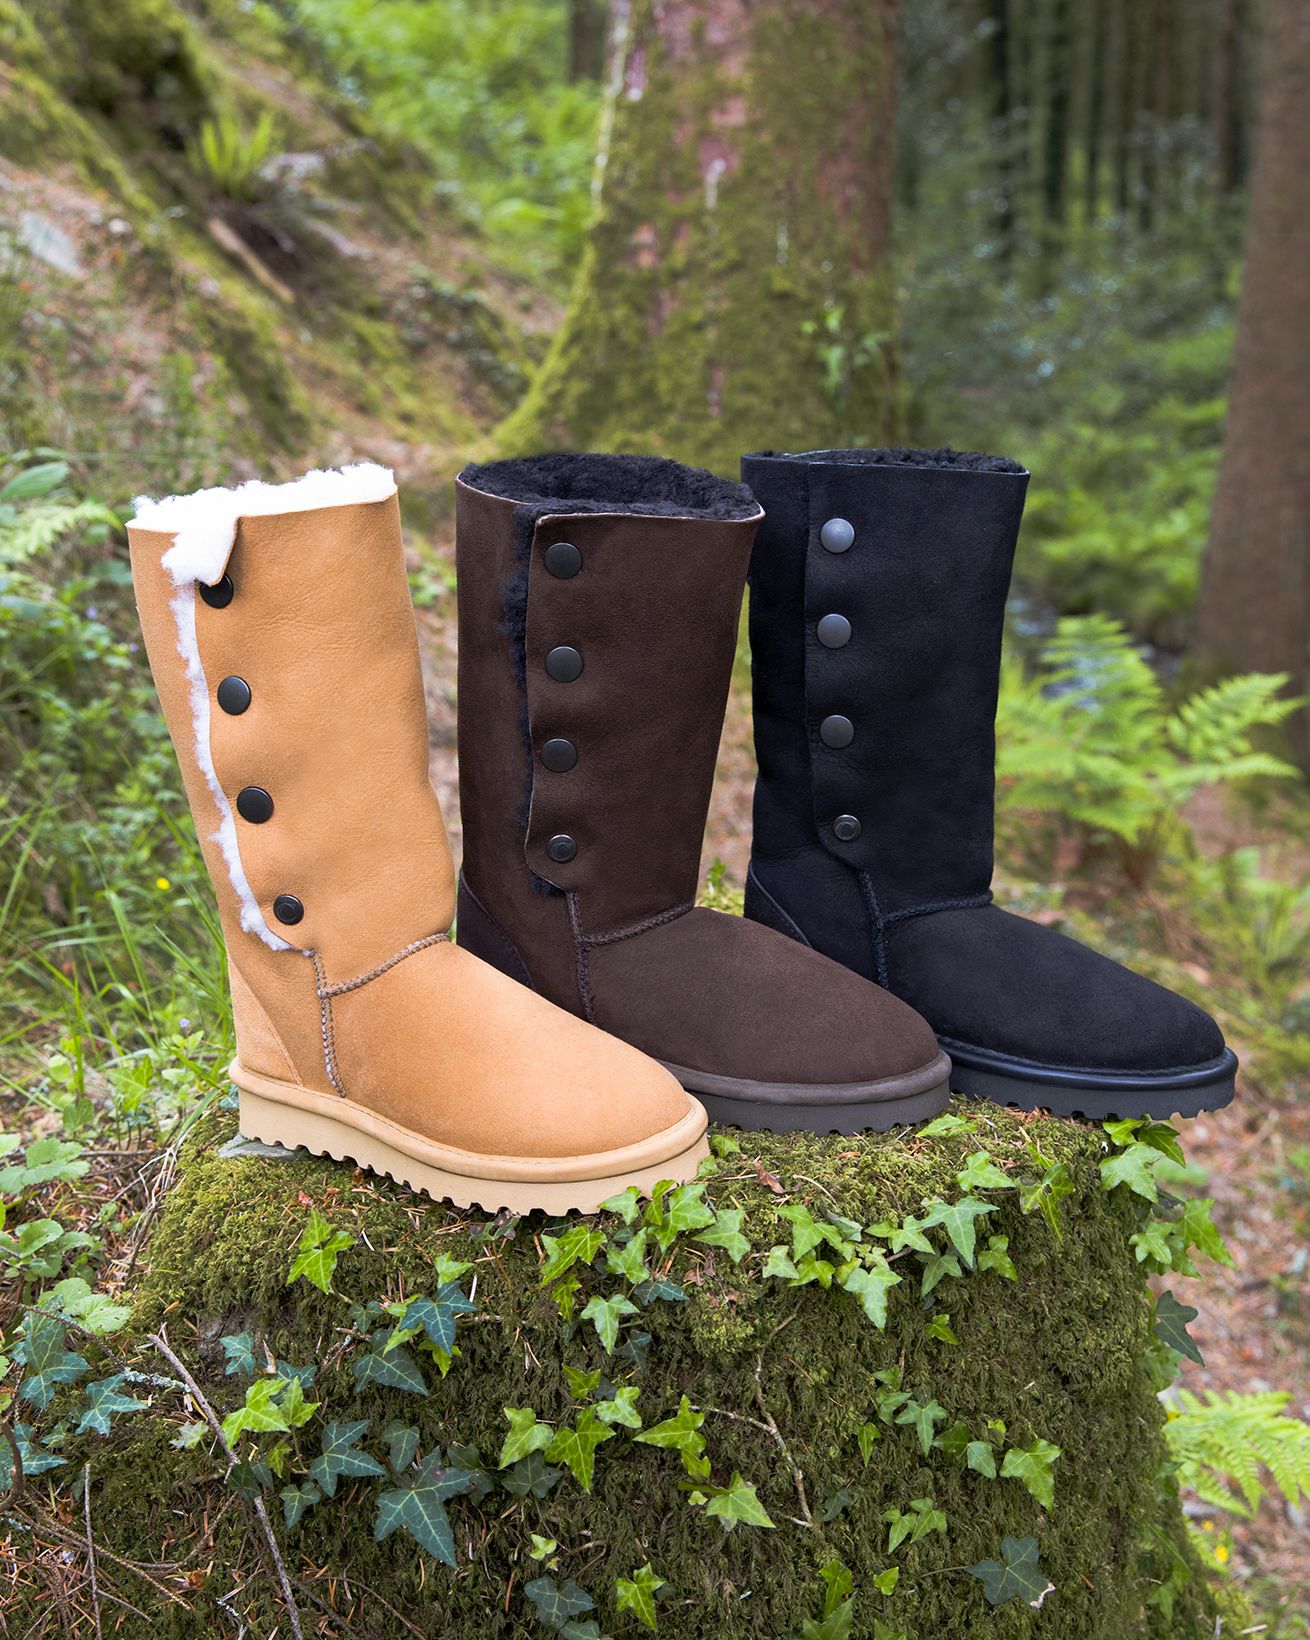 Popper Shearling Boots - Calf Height